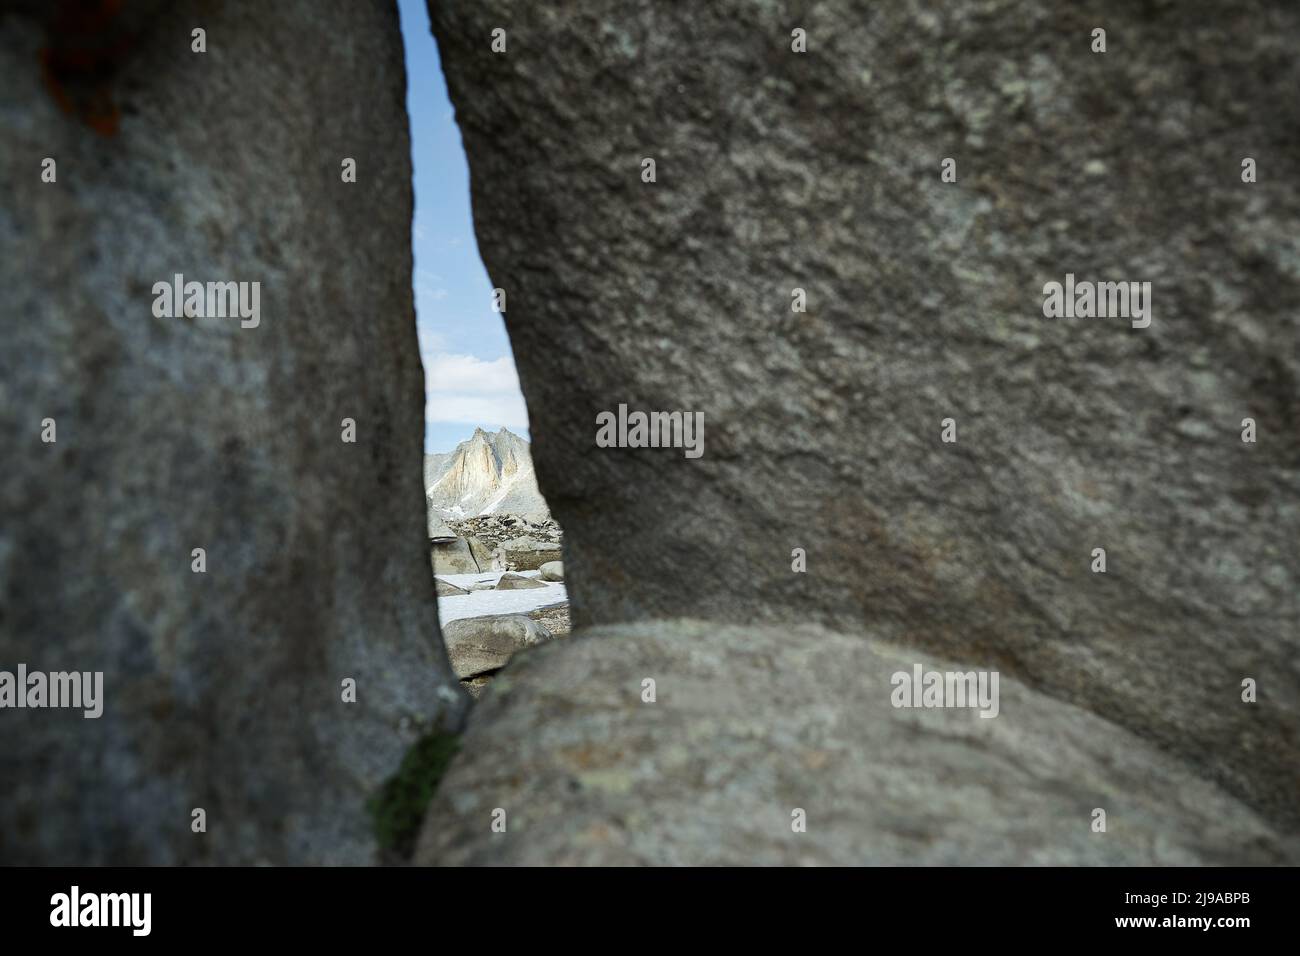 Beautiful scenery of the big rocky mountain trough the crack at cloudy blue in Tien Shan, Kazakhstan Stock Photo